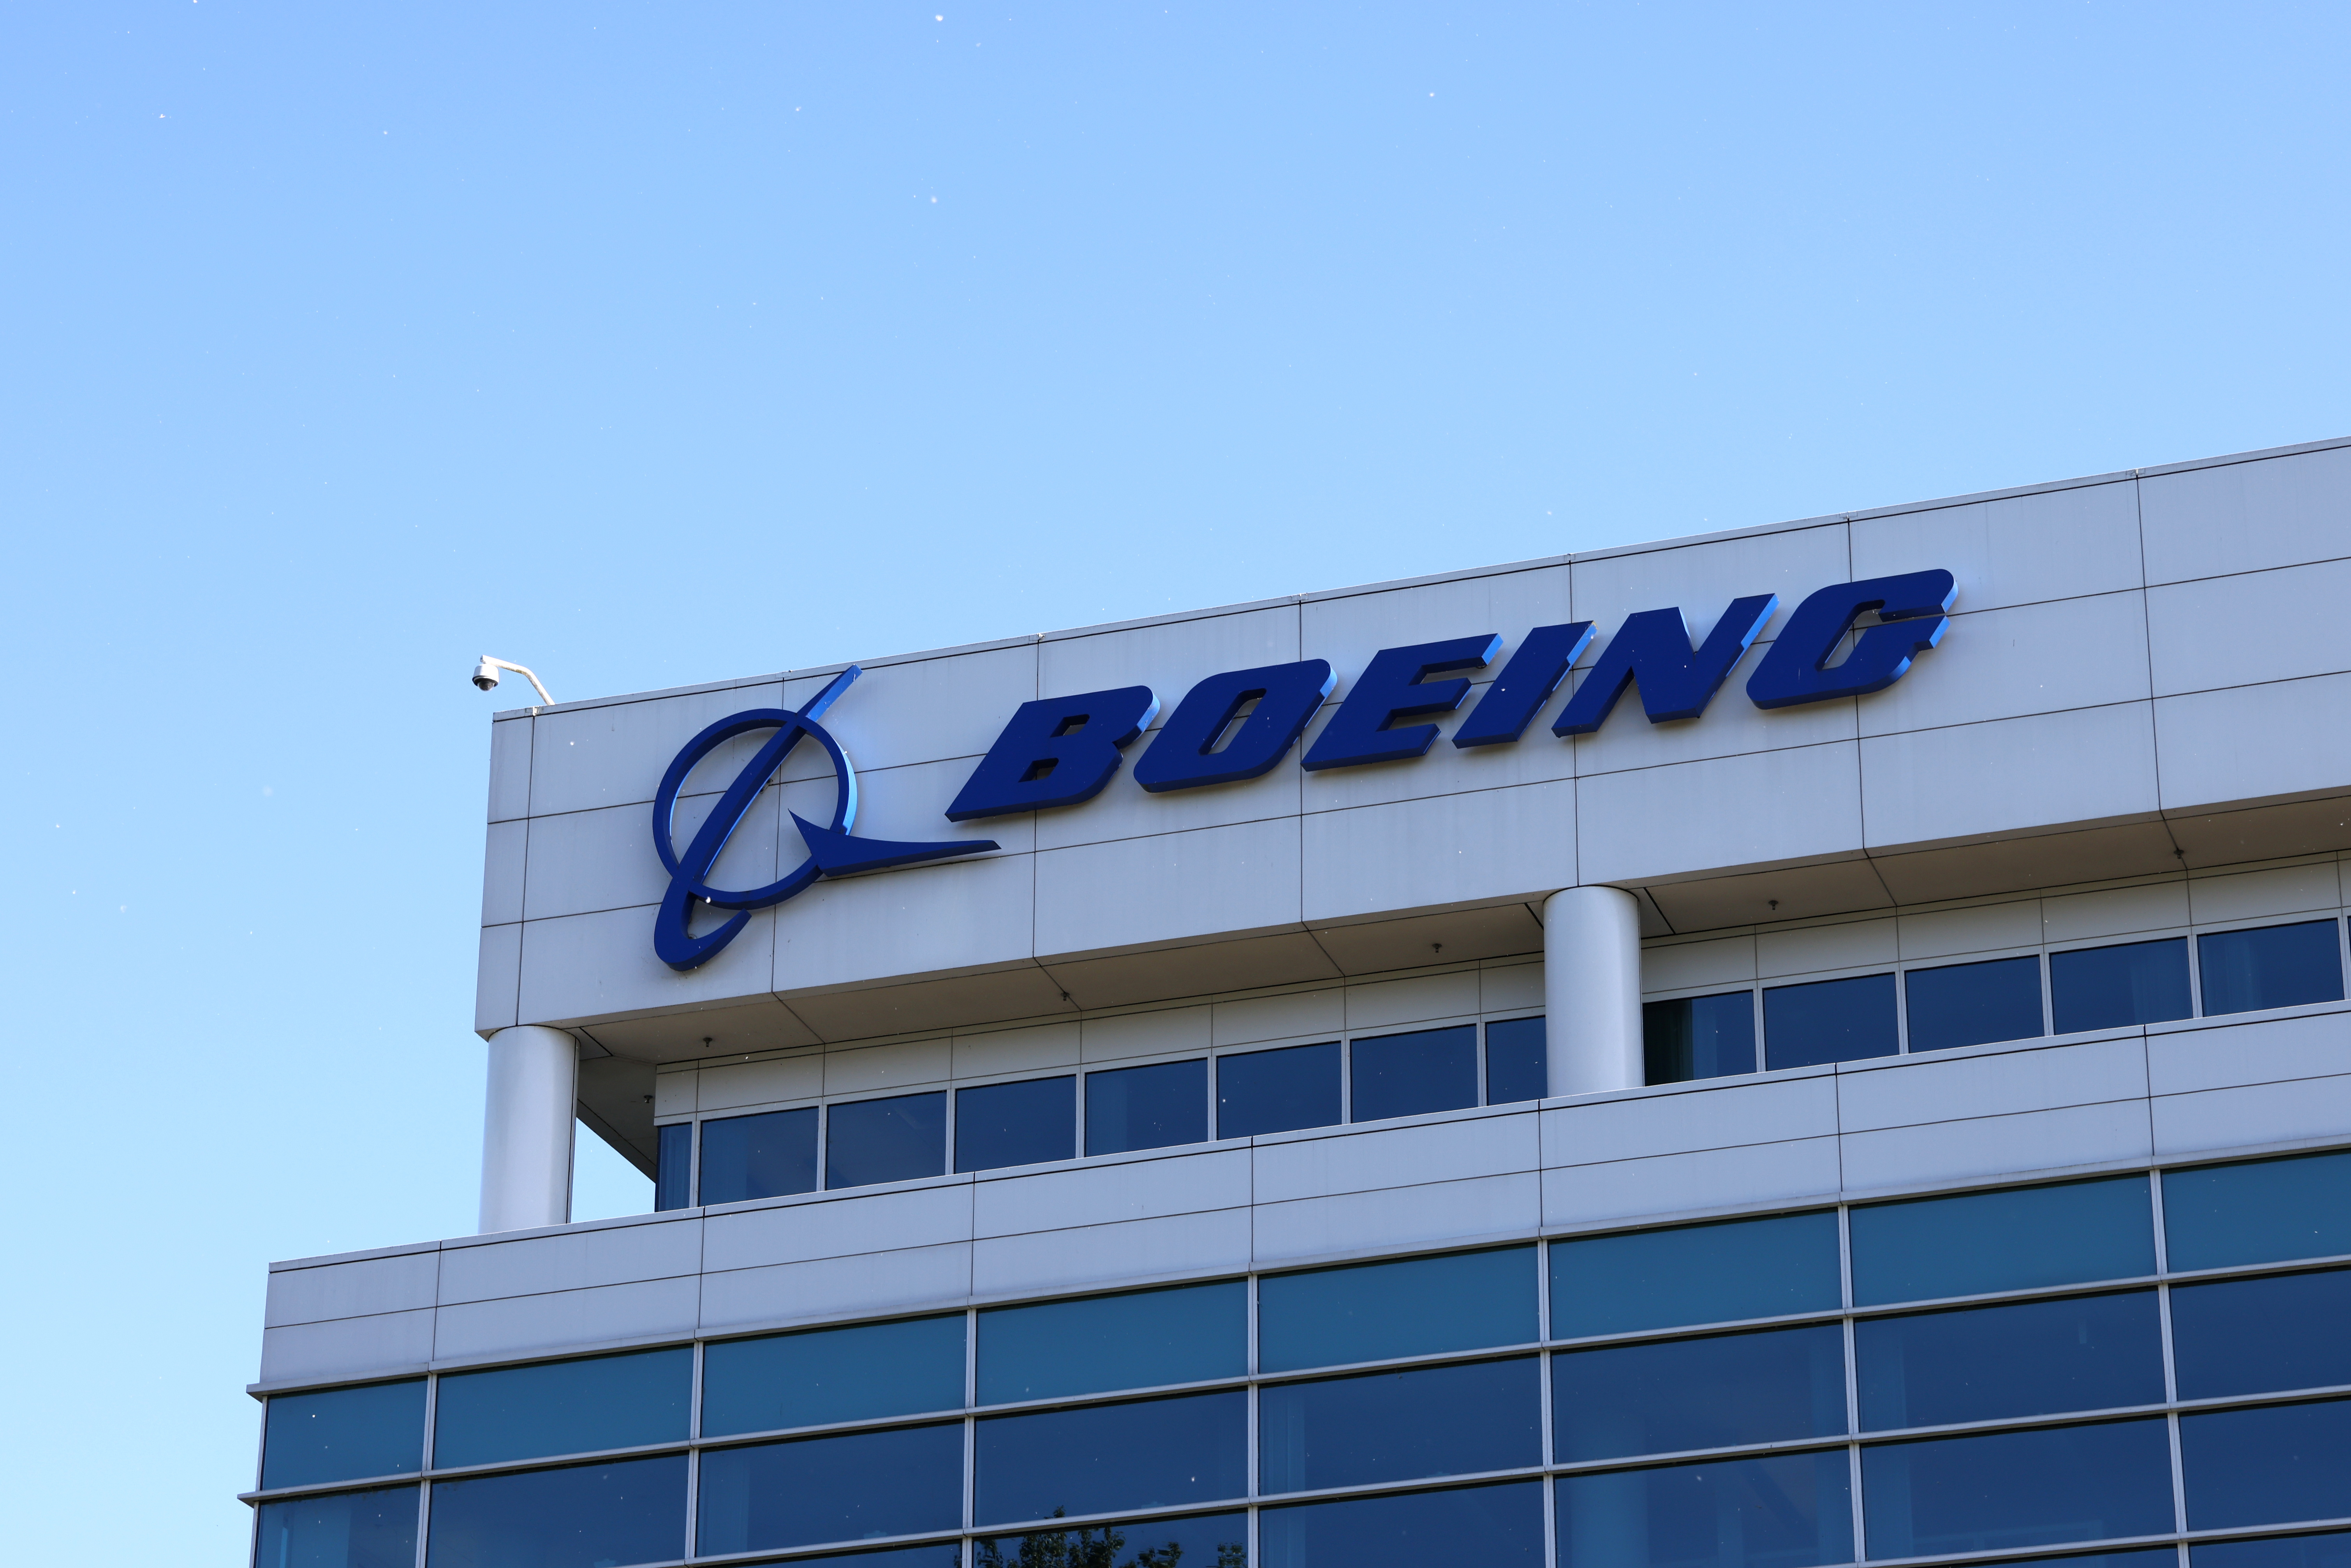 Locations where Boeing owns real estate in Seattle